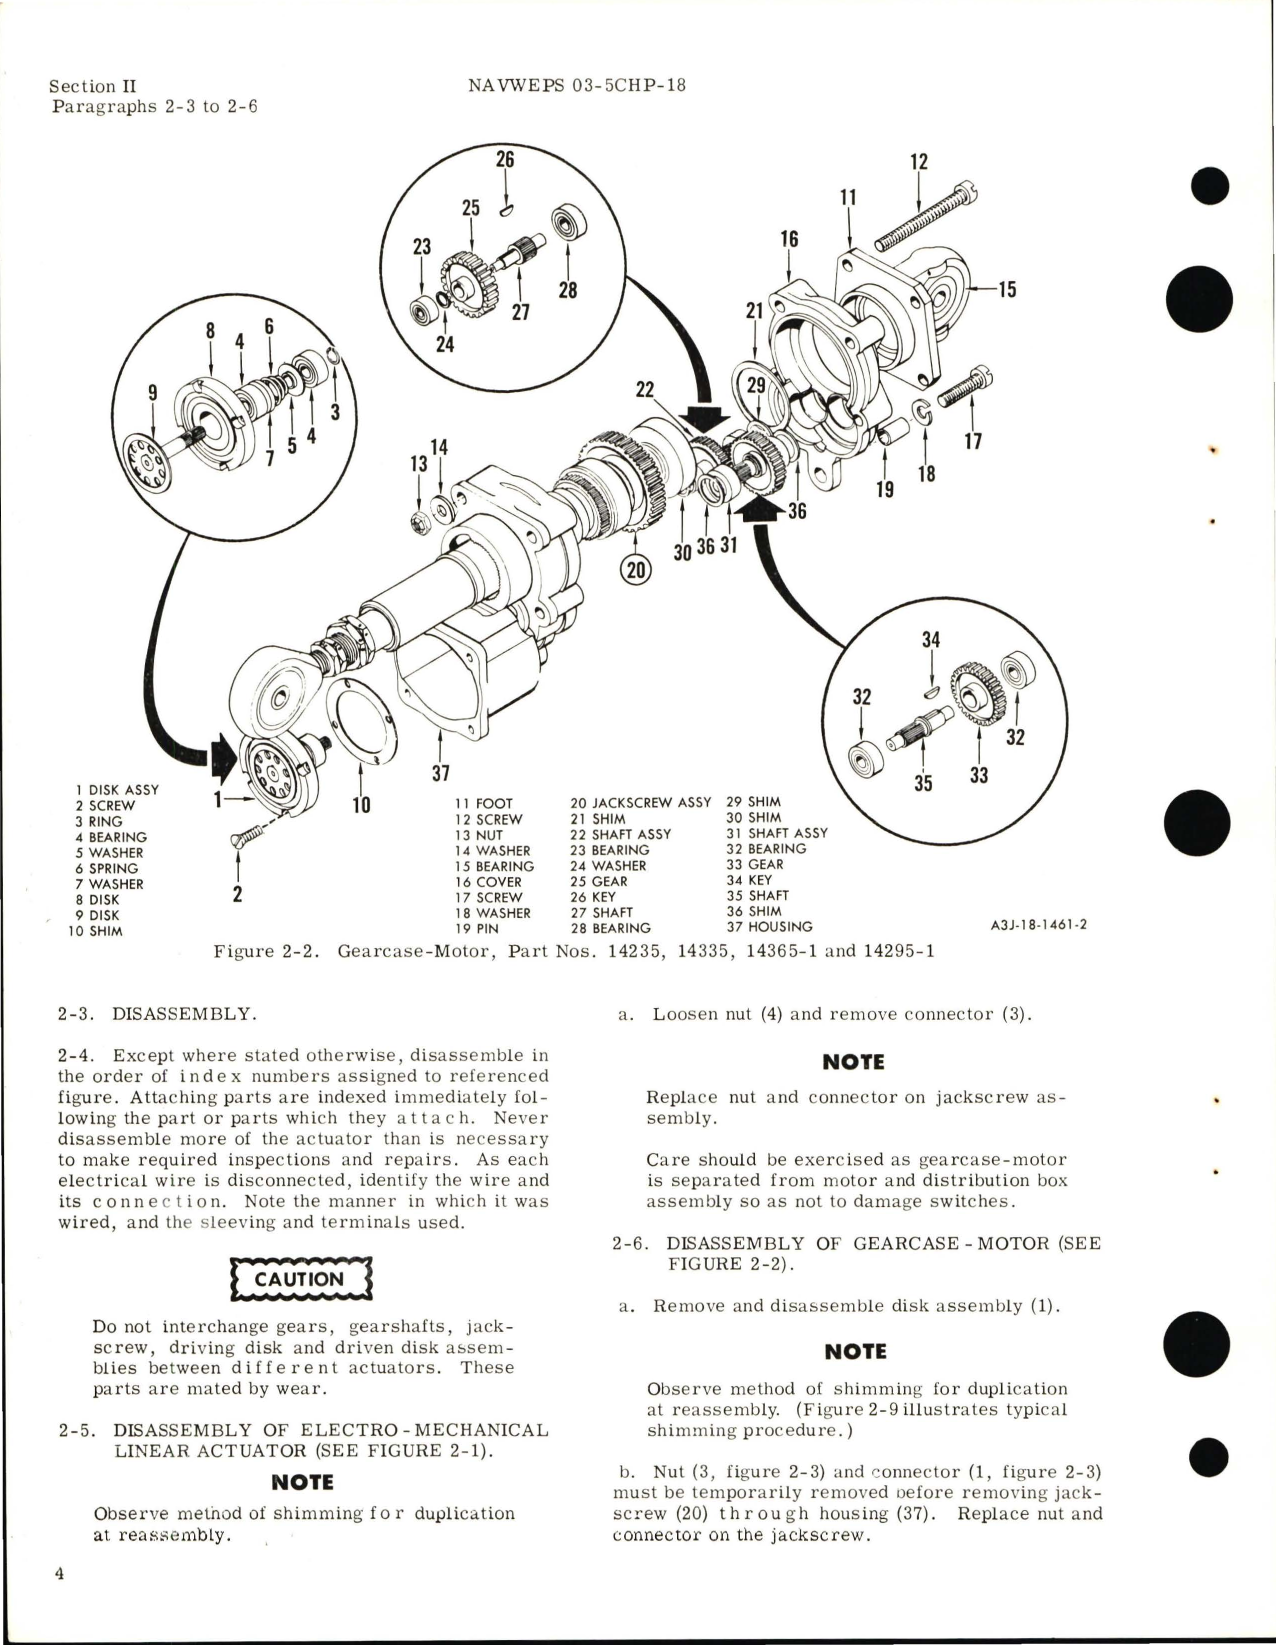 Sample page 8 from AirCorps Library document: Overhaul Instructions for Electro-Mechanical Linear Actuator 3010-4, 3020-5, 3040-4, 3060-4, 3590-3, and 6440